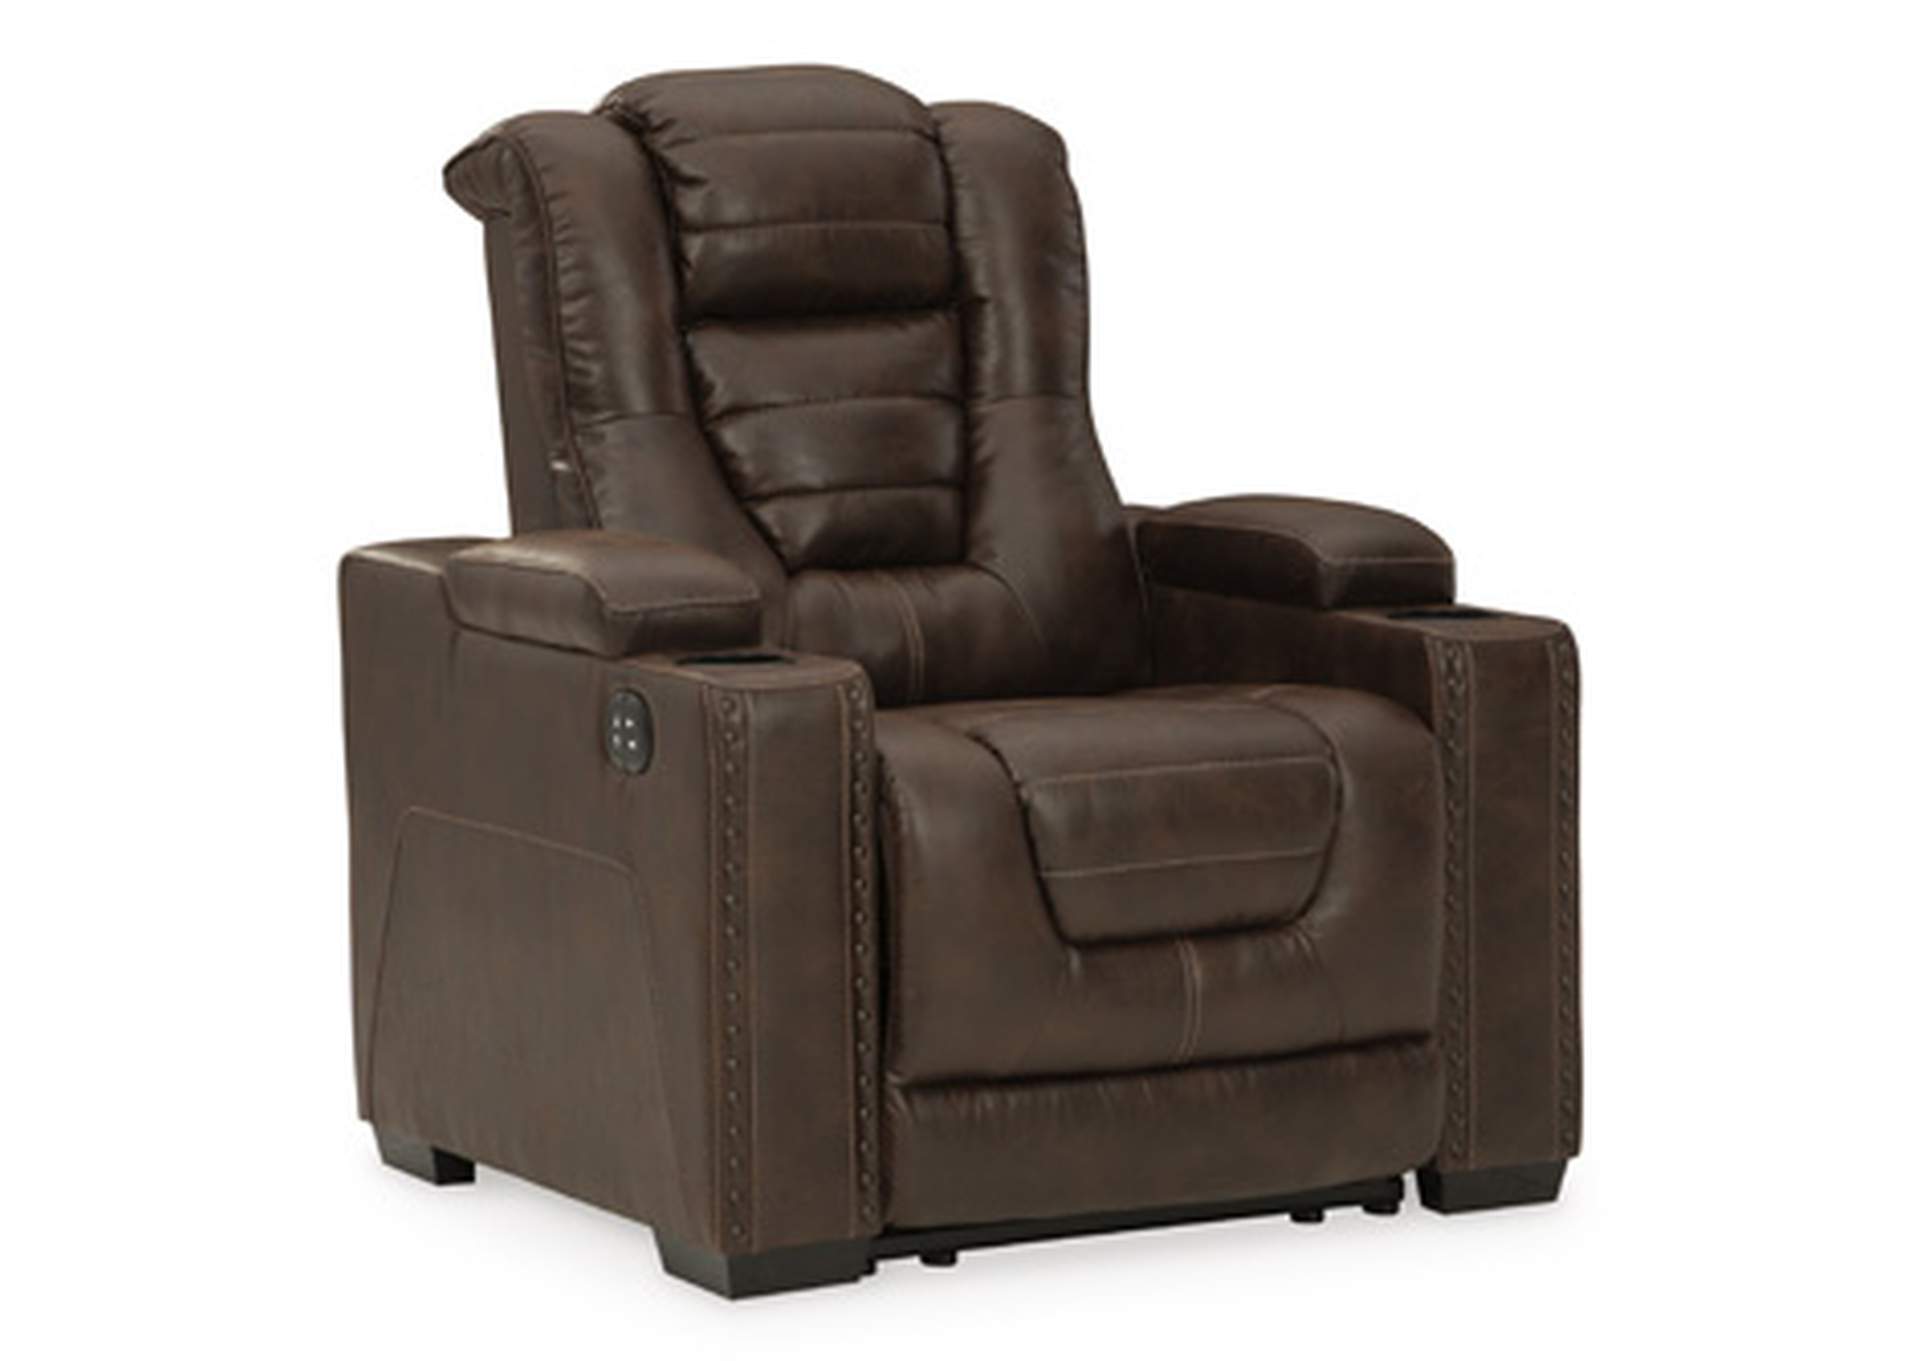 Owner's Box Power Recliner,Signature Design By Ashley